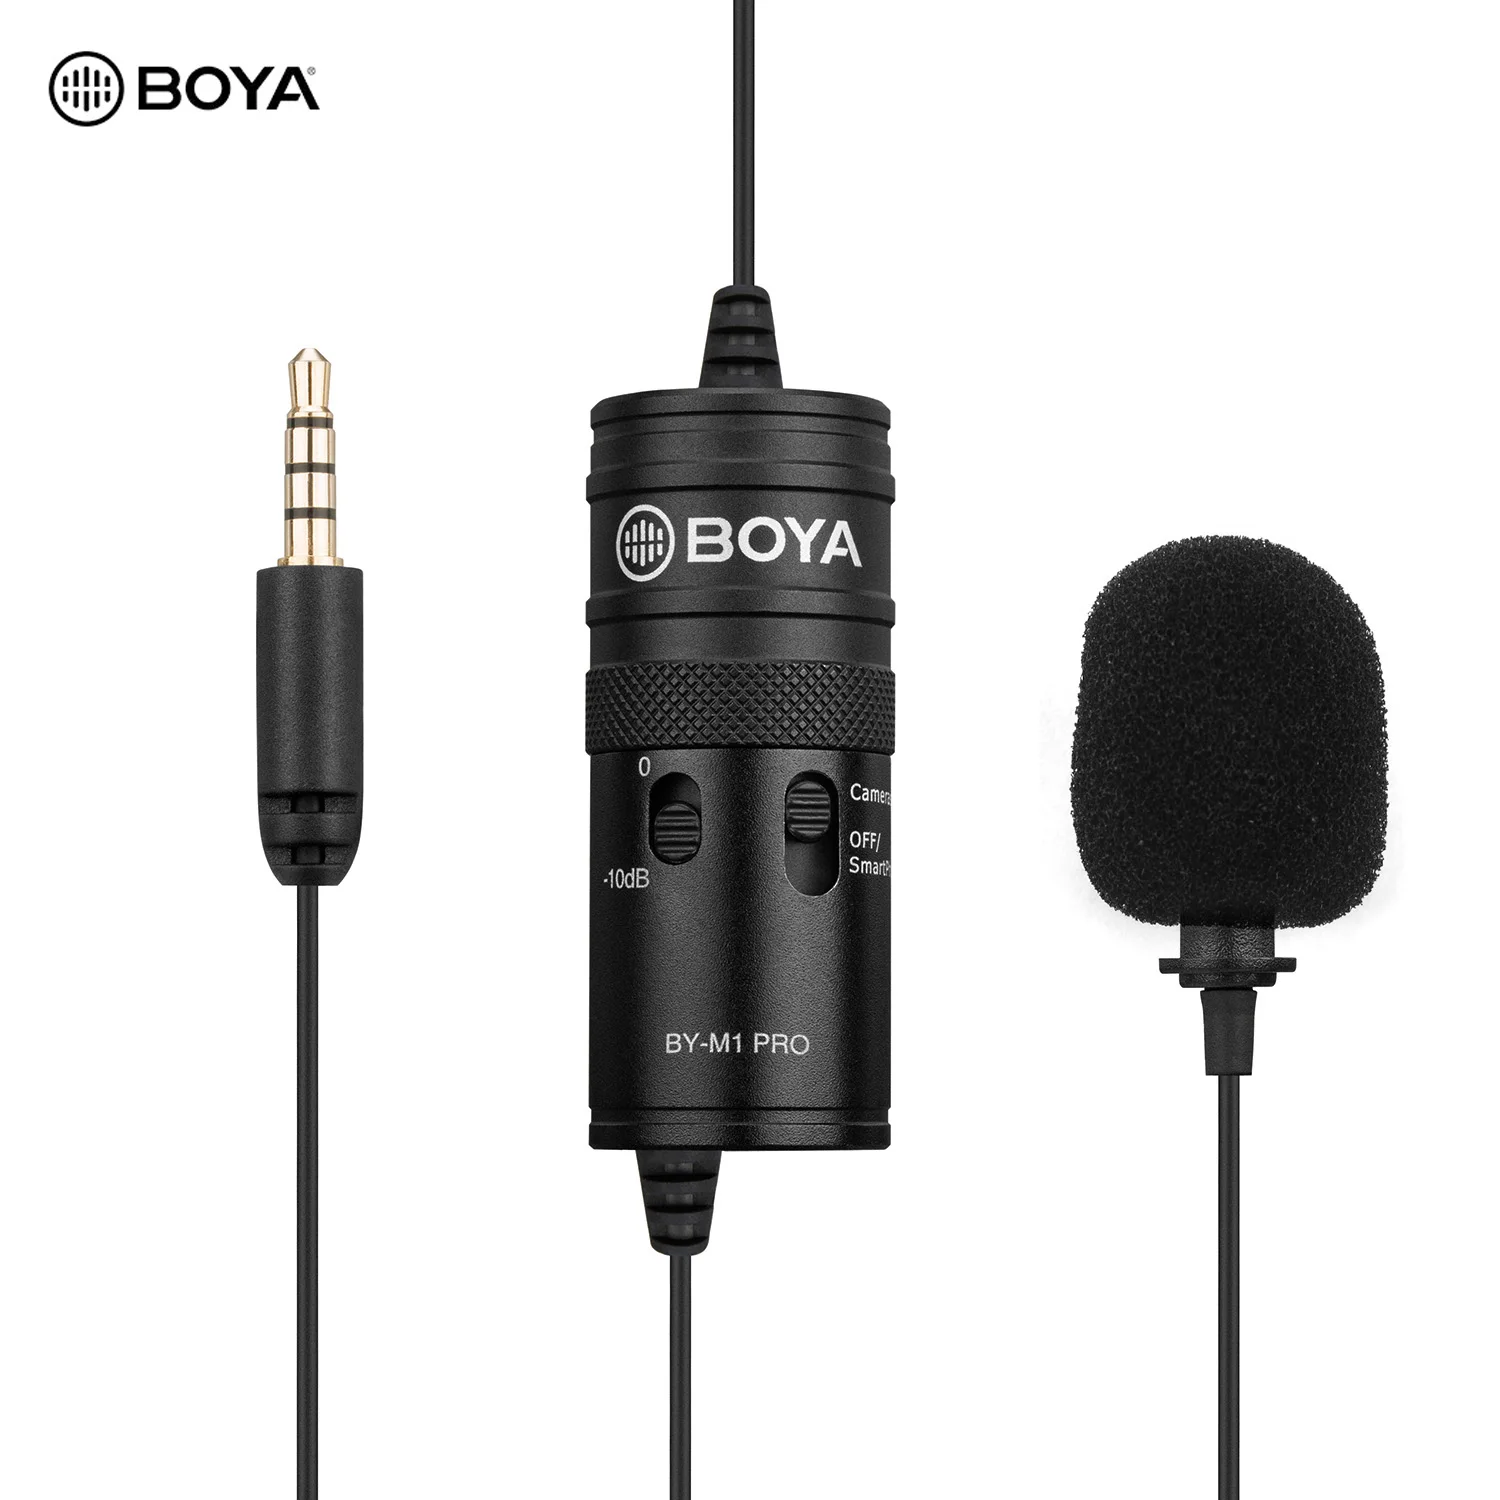 

BOYA BY-M1 Pro universal lavalier microphone clip on condenser microphone for camcroders DSLR smartphone audio recorders